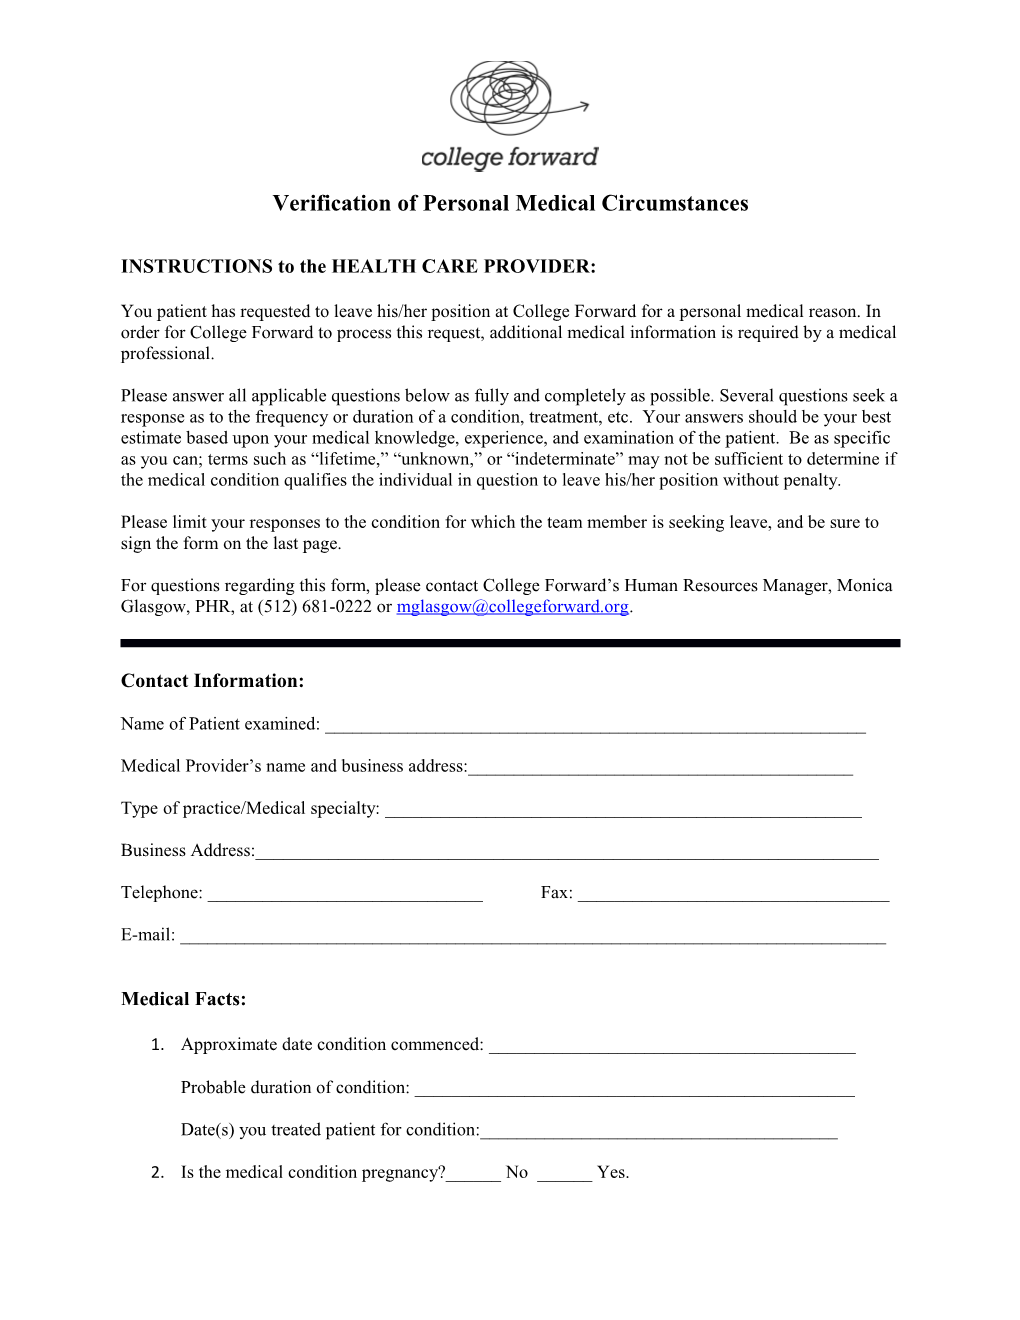 Verification of Personal Medical Circumstances